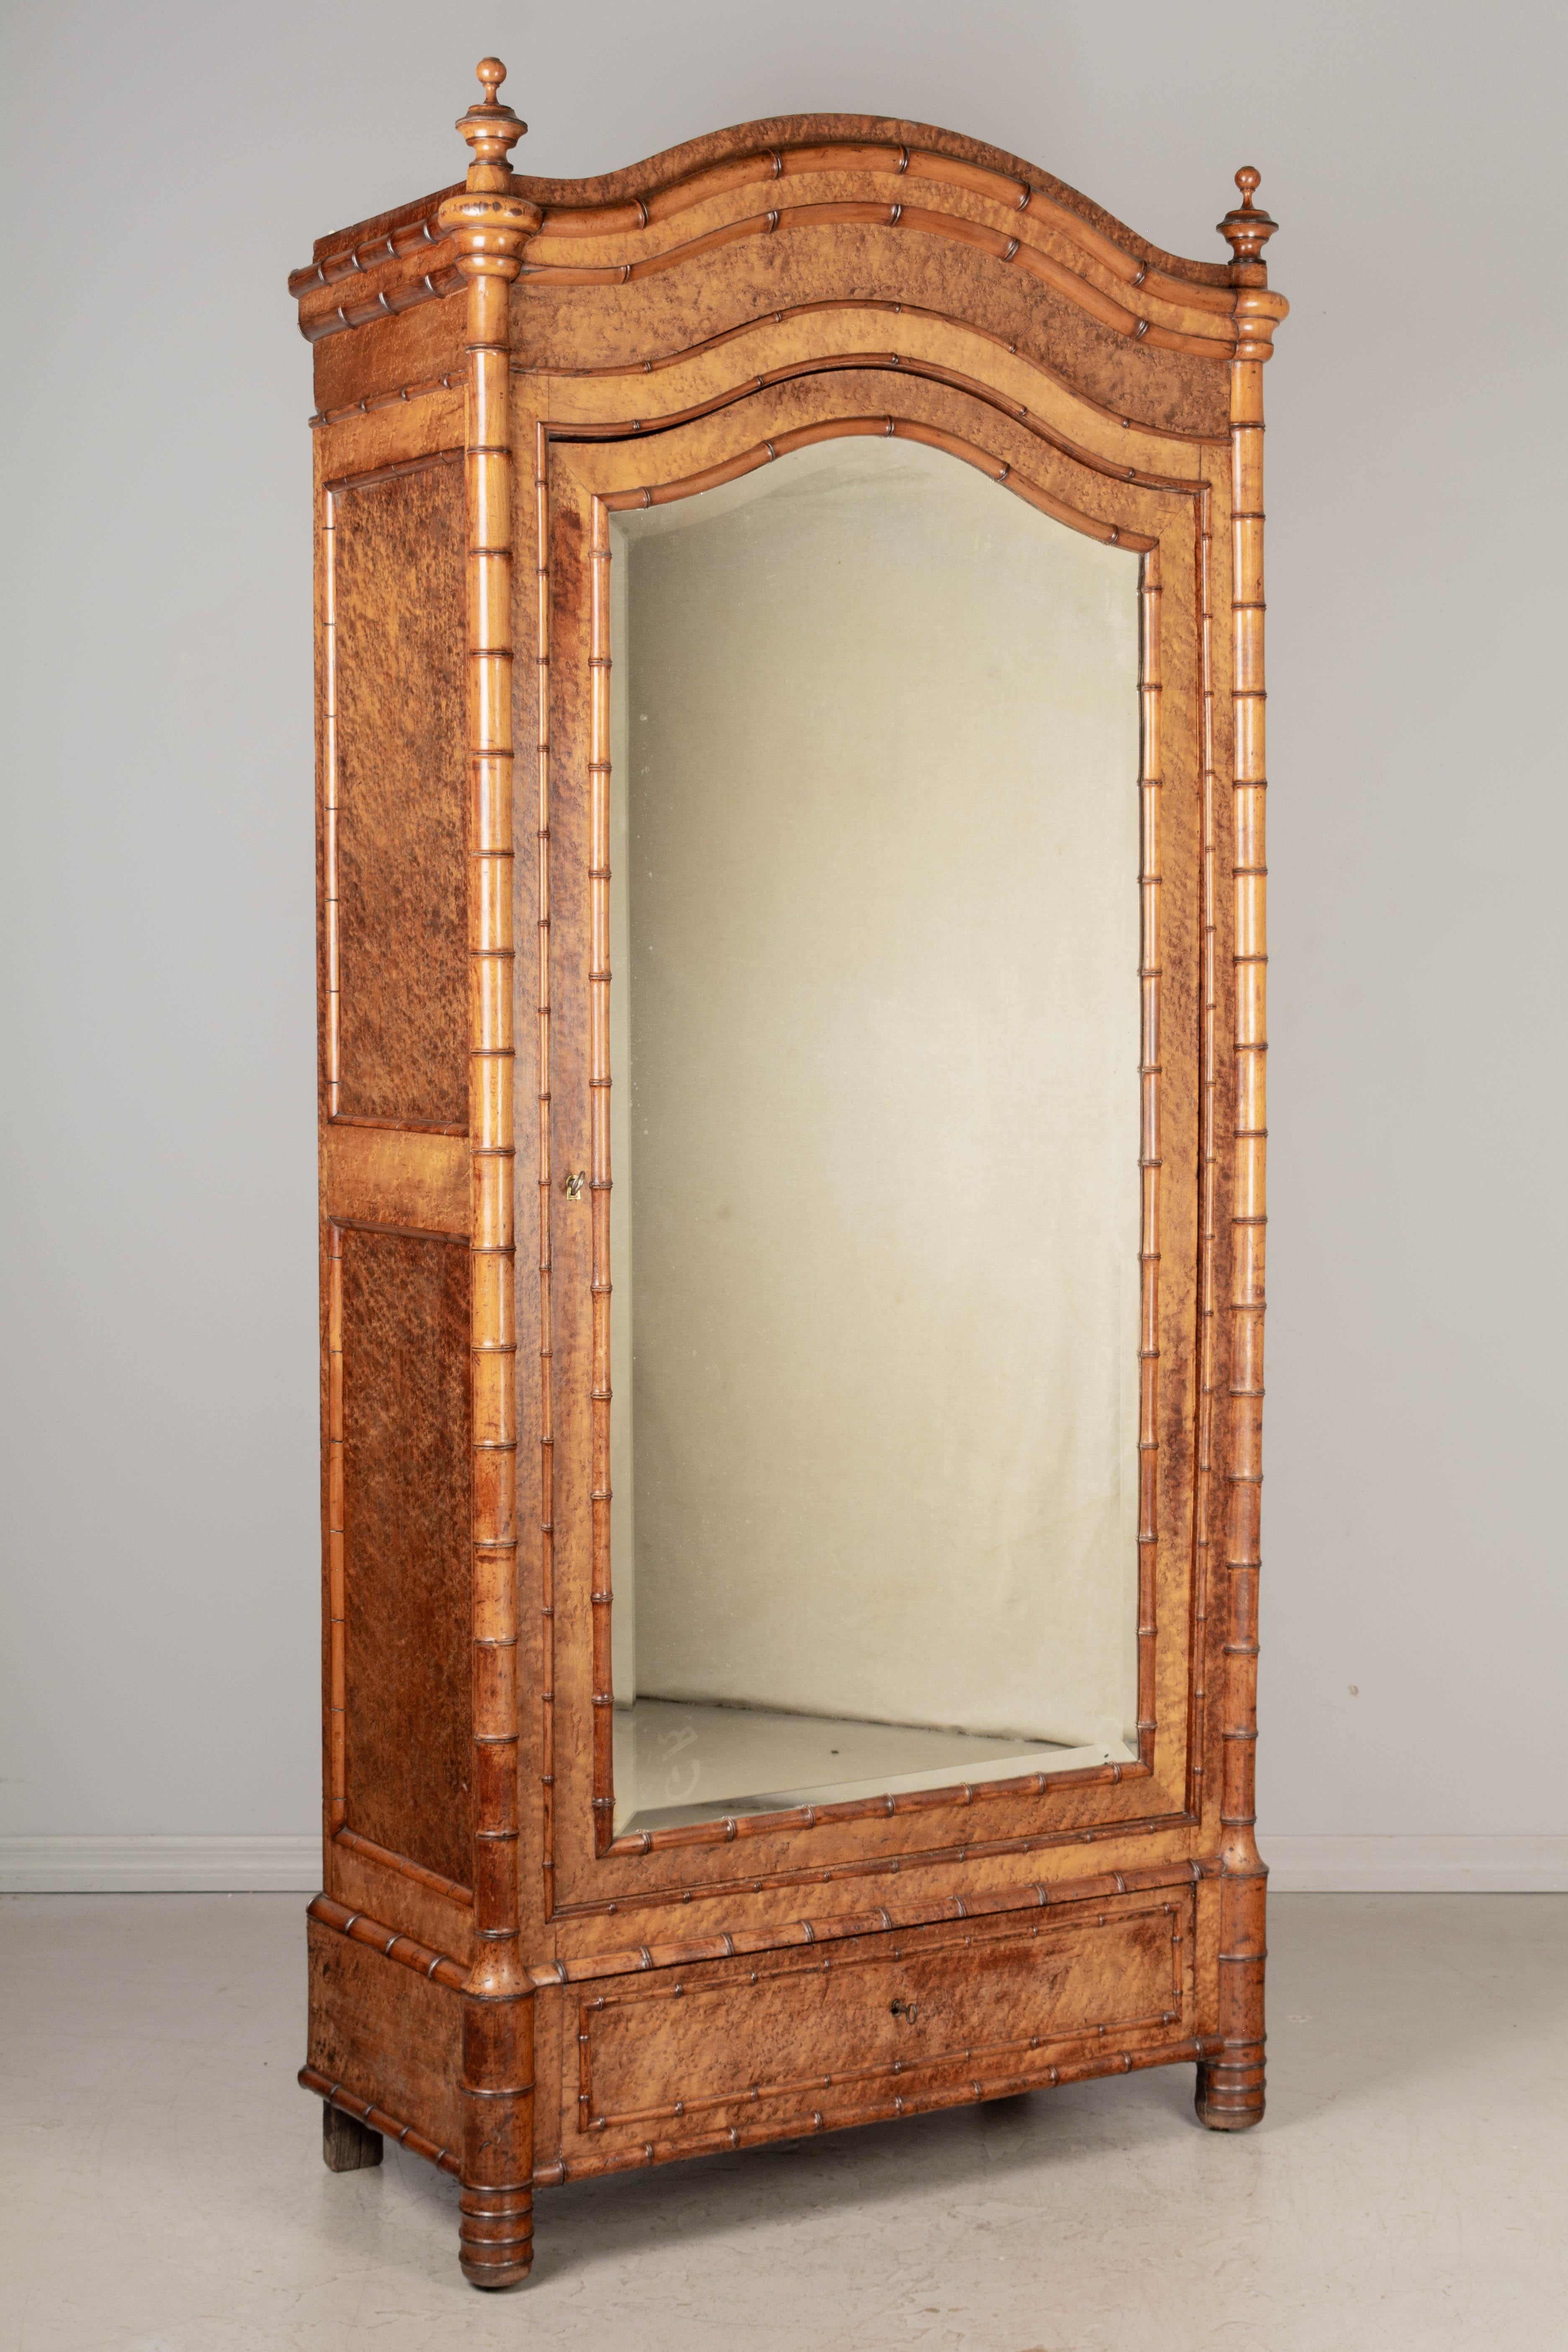 A 19th century French Napoleon III faux bamboo armoire, or wardrobe, made of birdseye maple with solid cherry faux bamboo details, chapeau de gendarme crown and beveled mirror door. Large turned wood finials and realistic looking bamboo design.